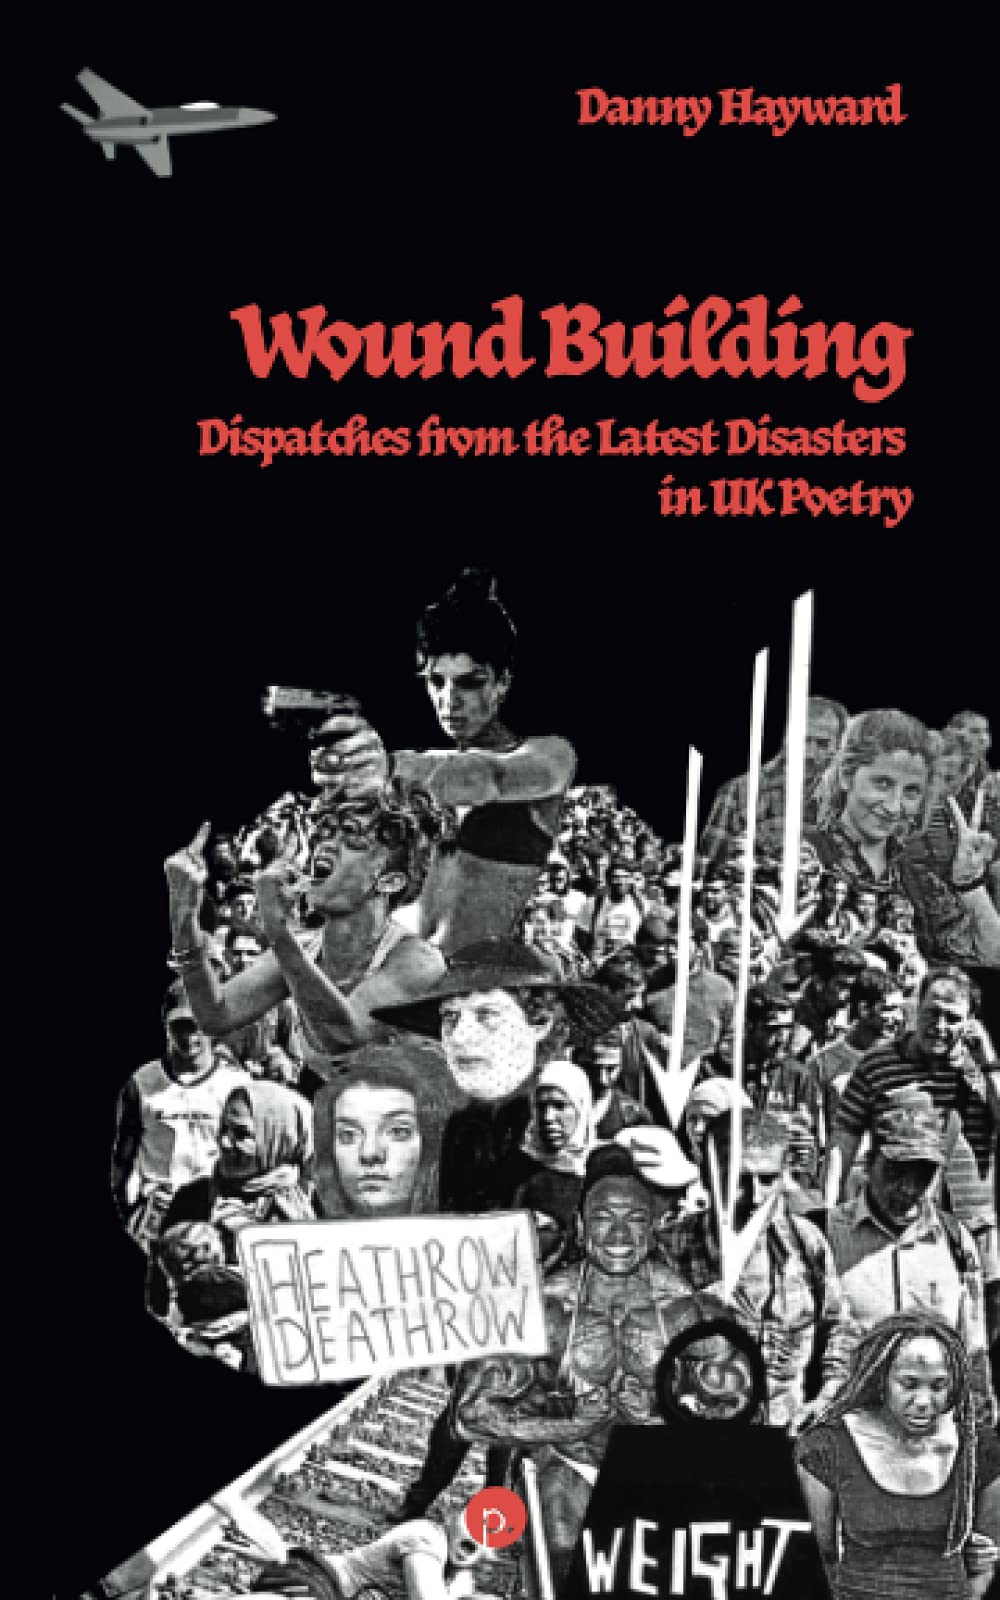 Danny Hayward • Wound Building: Dispatches from the Latest Disasters in UK Poetry